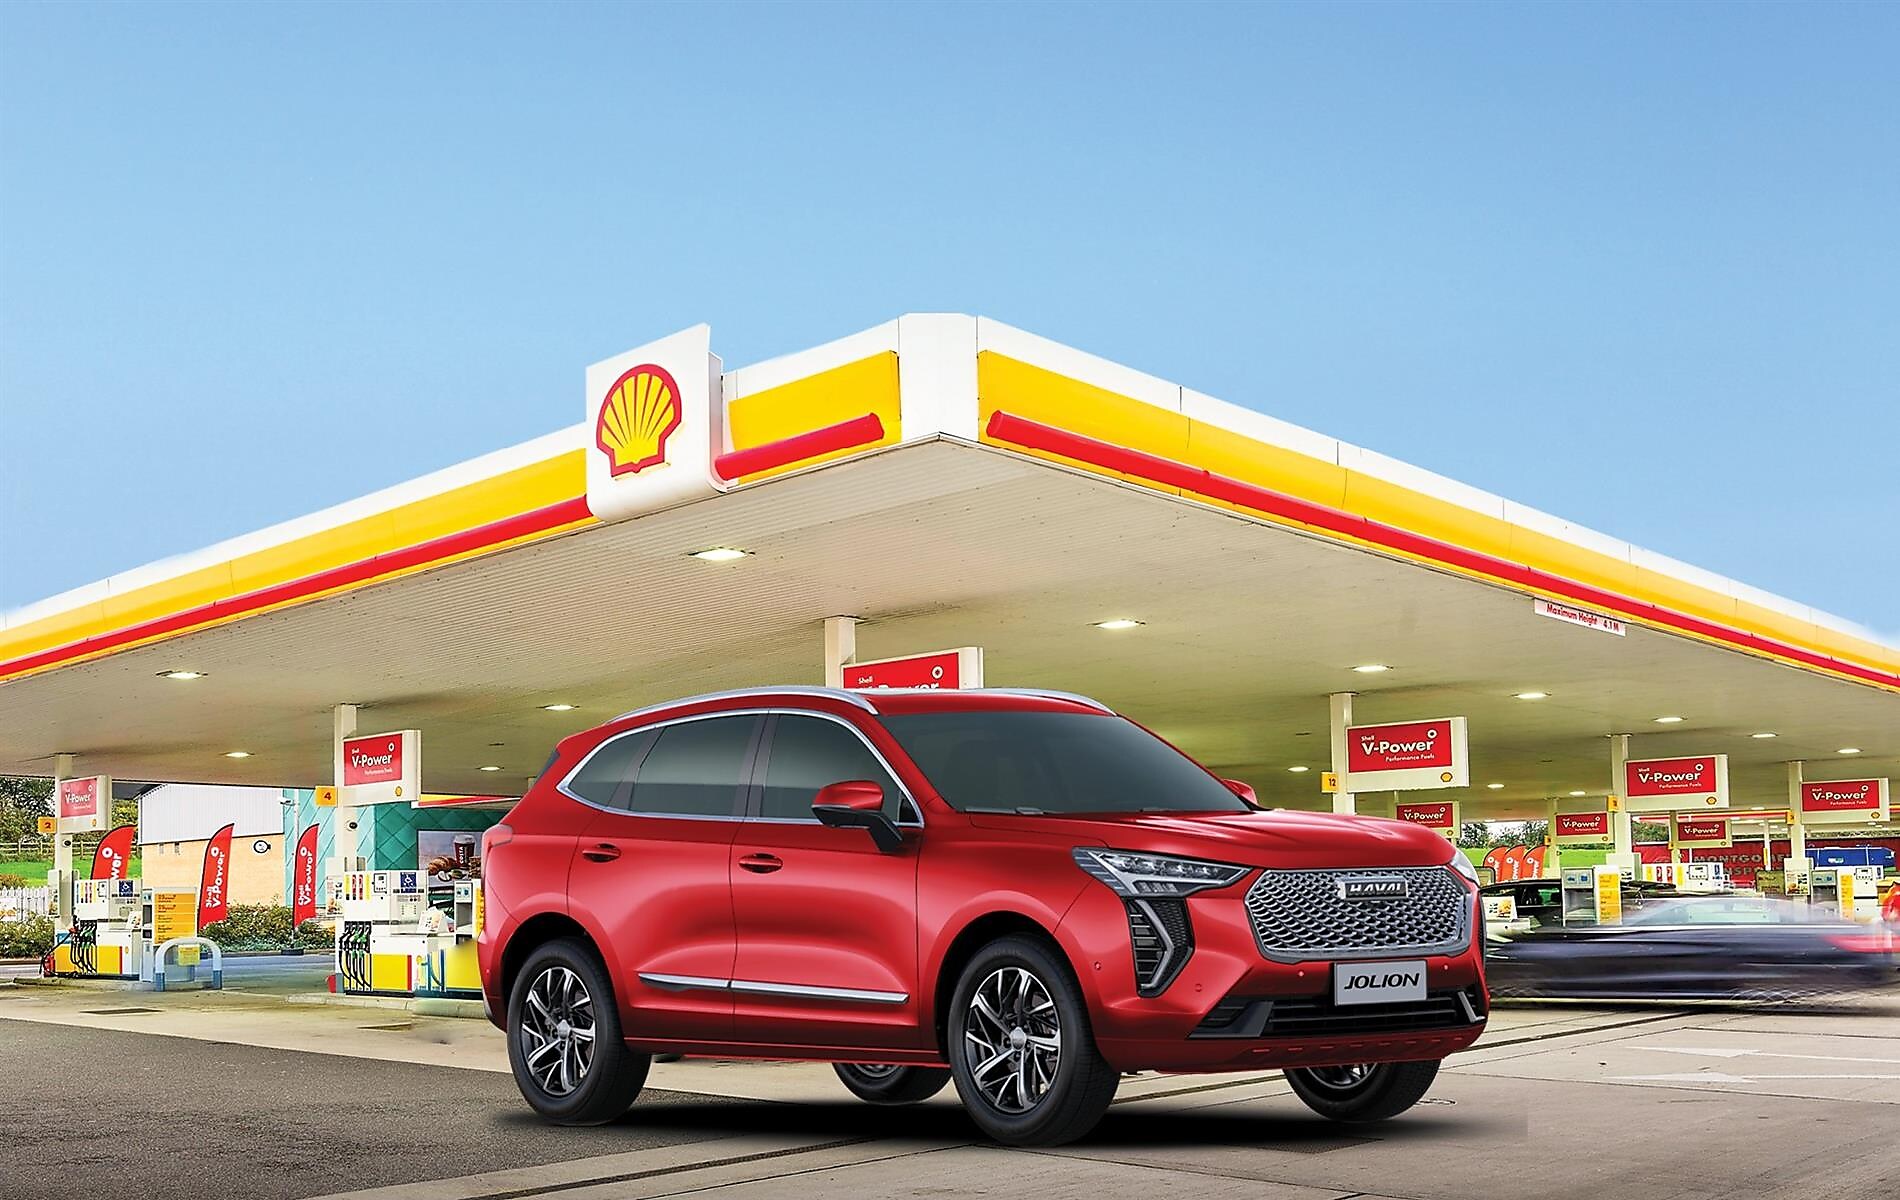 Win a car with Shell